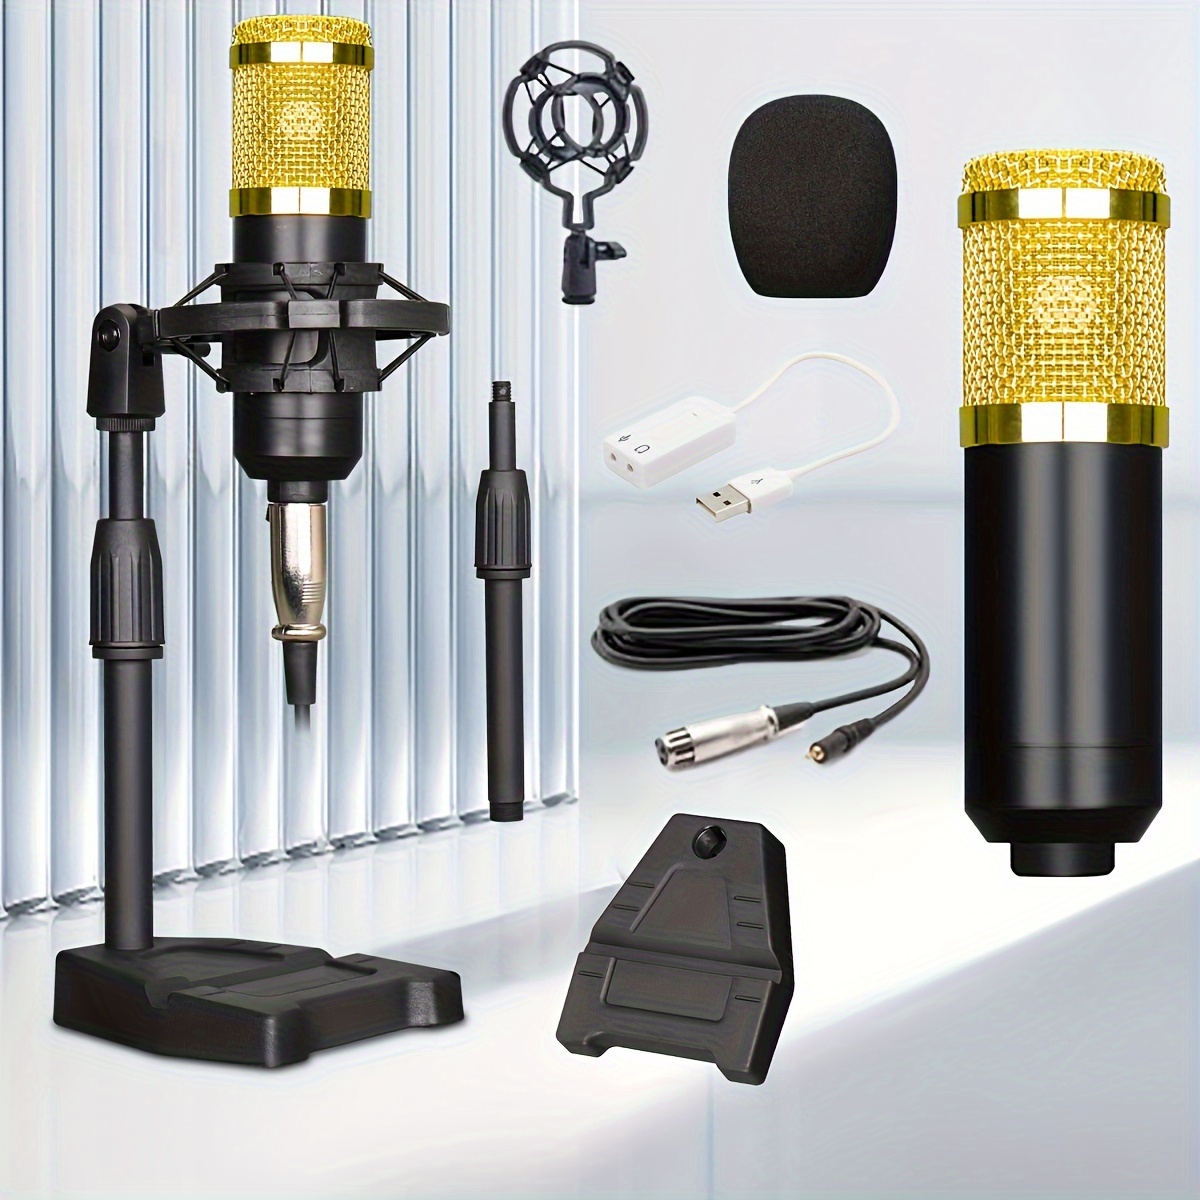 

Complete Set Of Black And Golden Bm-800 With Desktop Stand, Suitable For Recording On Mobile Phones And Computers, Gaming, Chatting, Singing